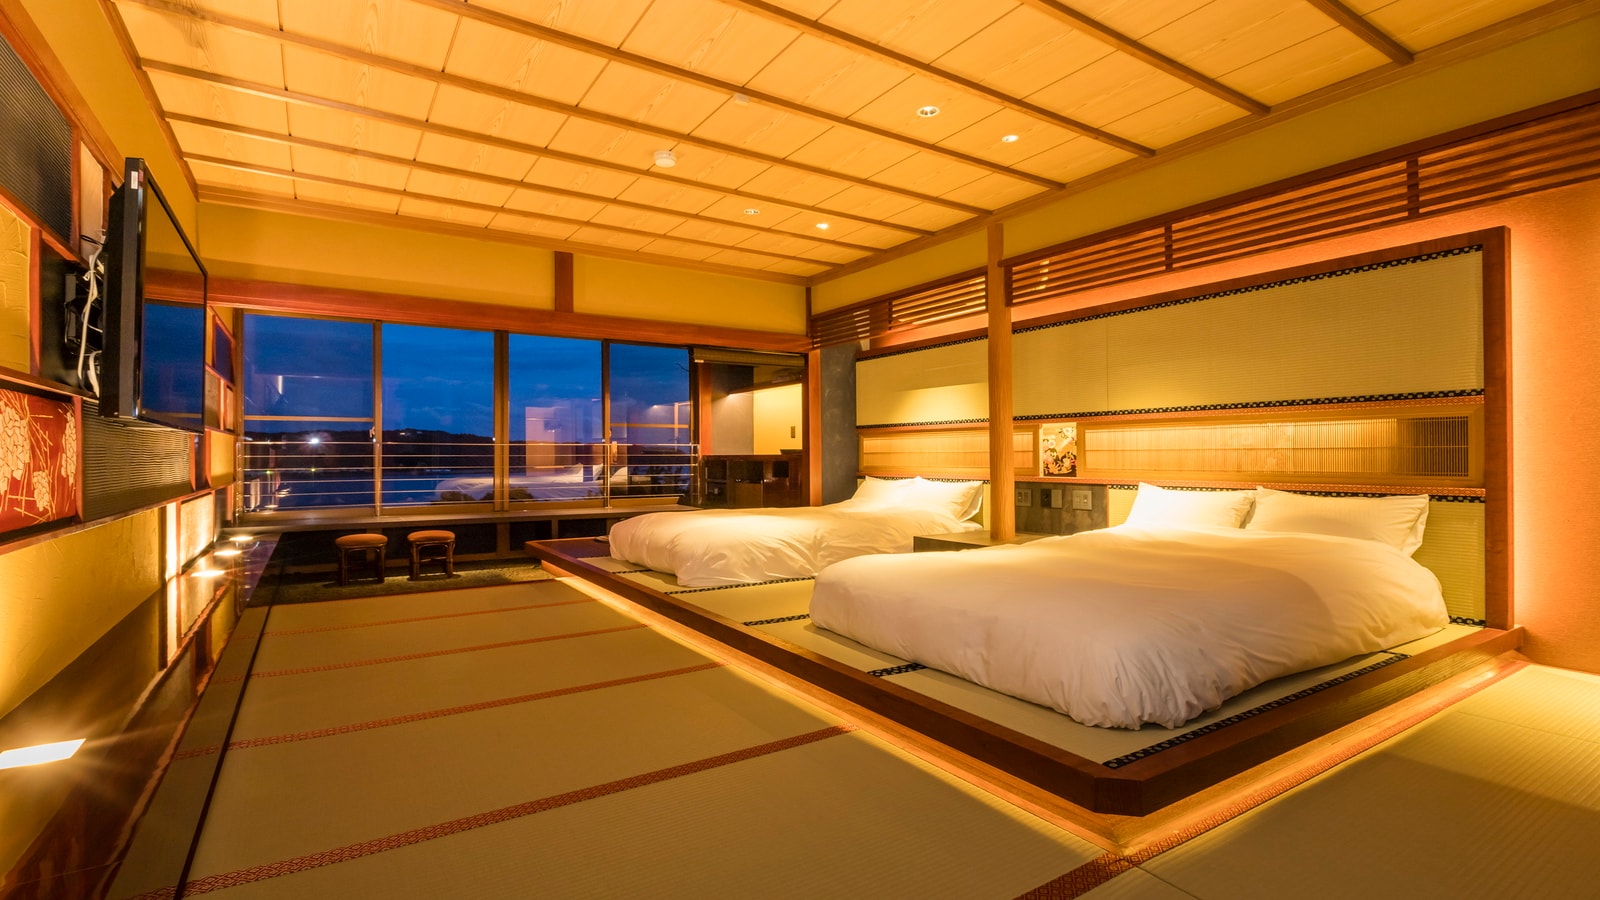 ◆ Away Bisako ◆ A modern Japanese-style room with tatami mats and shoji screens, which Japanese people have been familiar with for a long time.